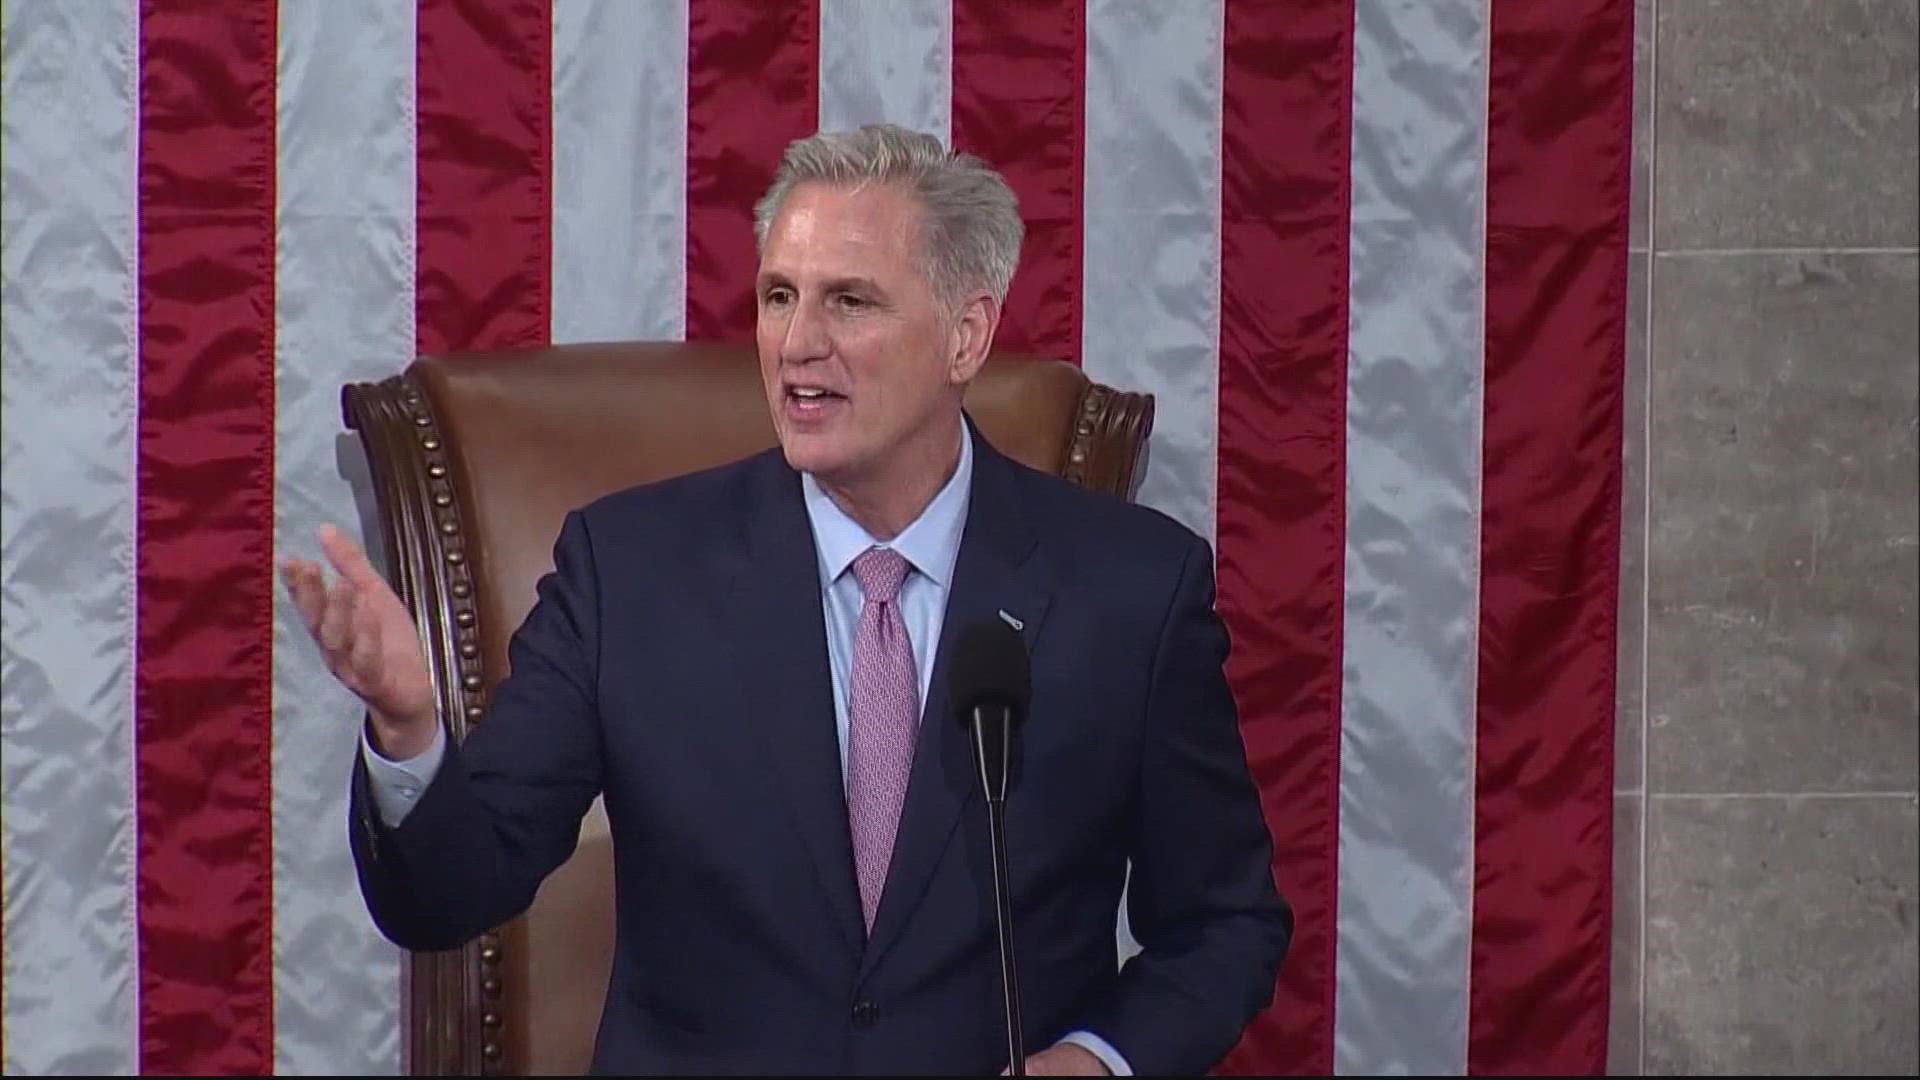 McCarthy finally crossed the majority threshold on the 15th ballot after floor tensions boiled over between McCarthy and holdout Matt Gaetz.